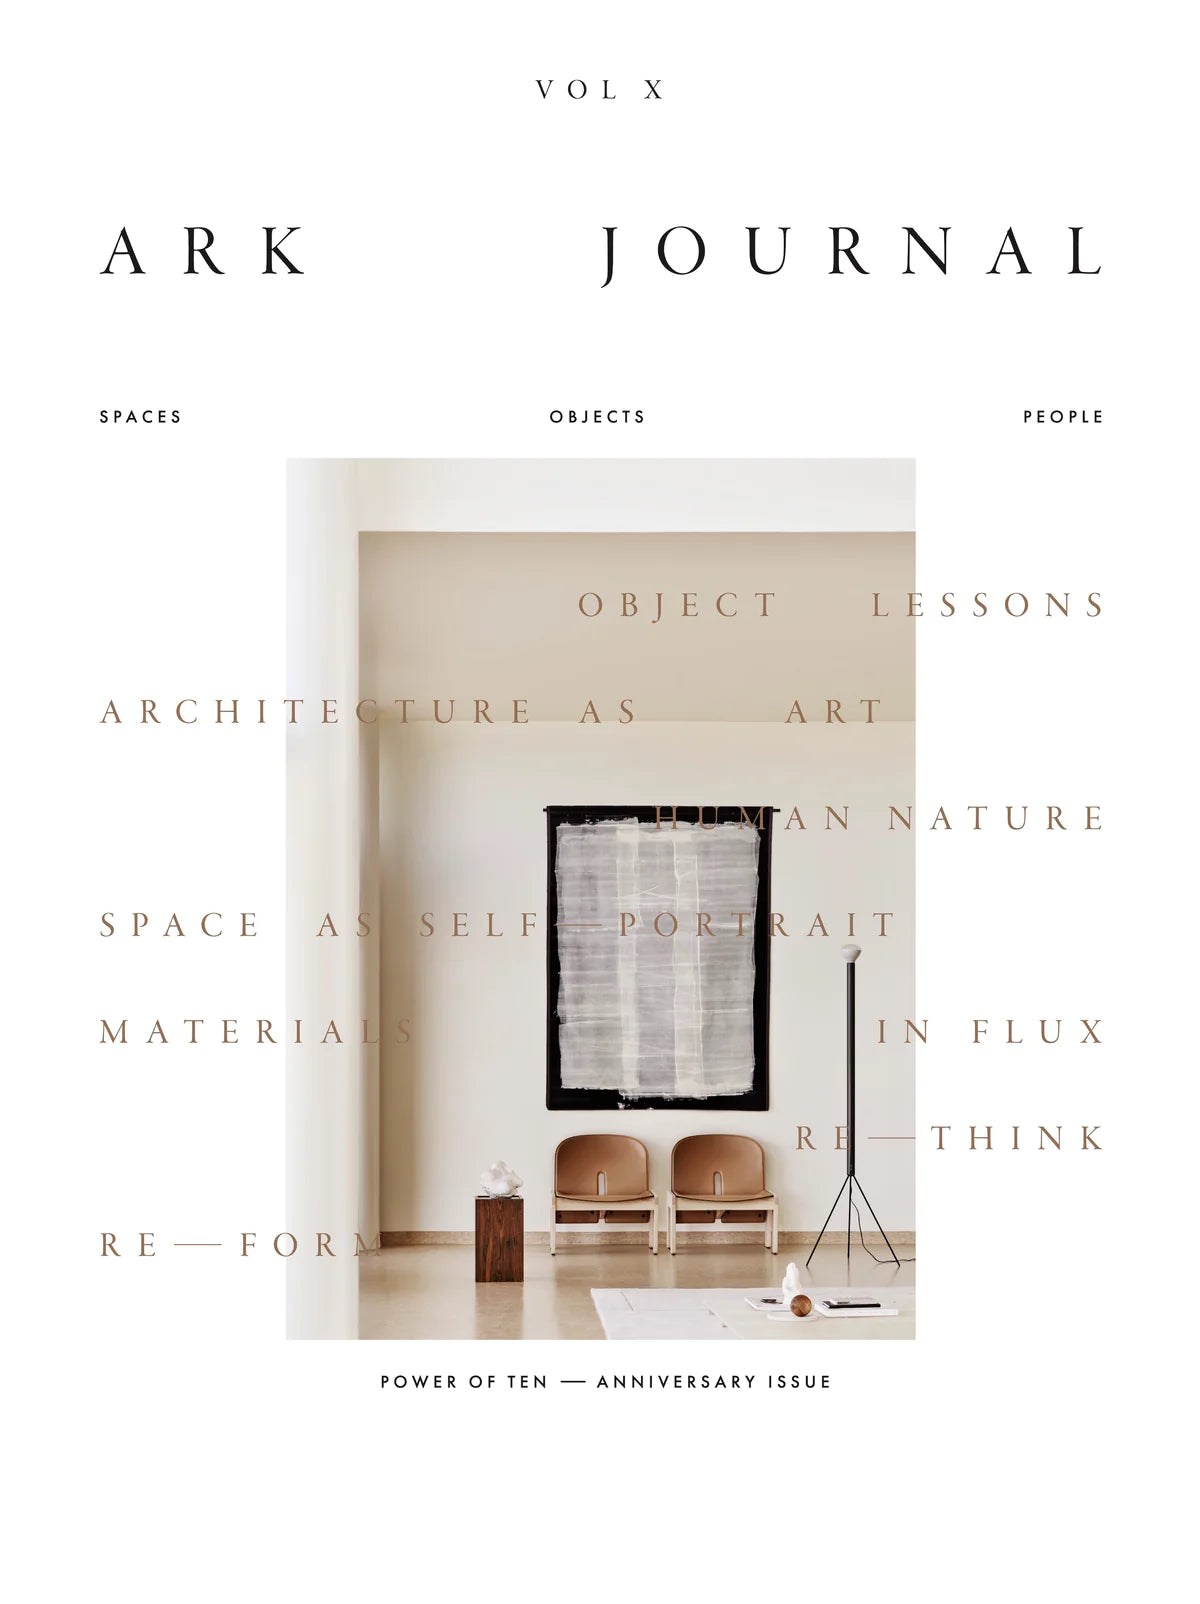 Ark Journal Vol. X in cover version 2